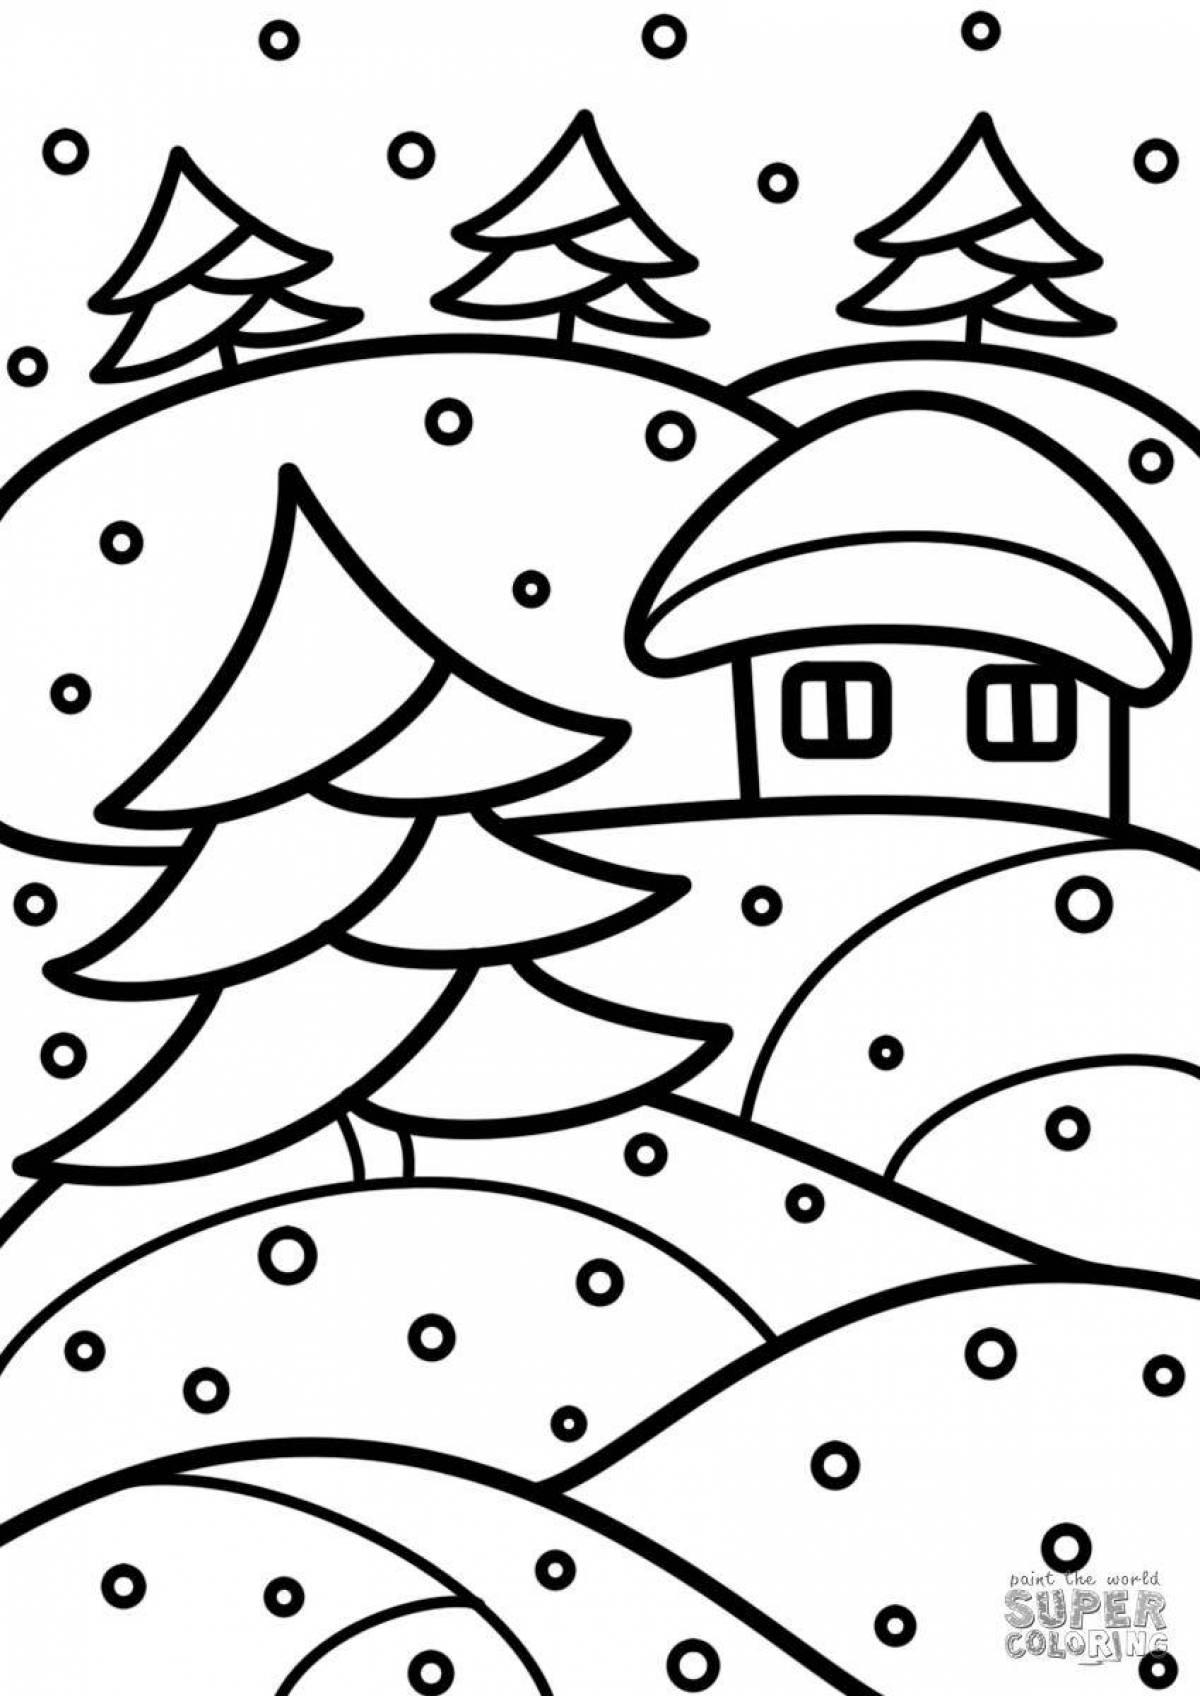 Fun coloring book winter for children 5 years old